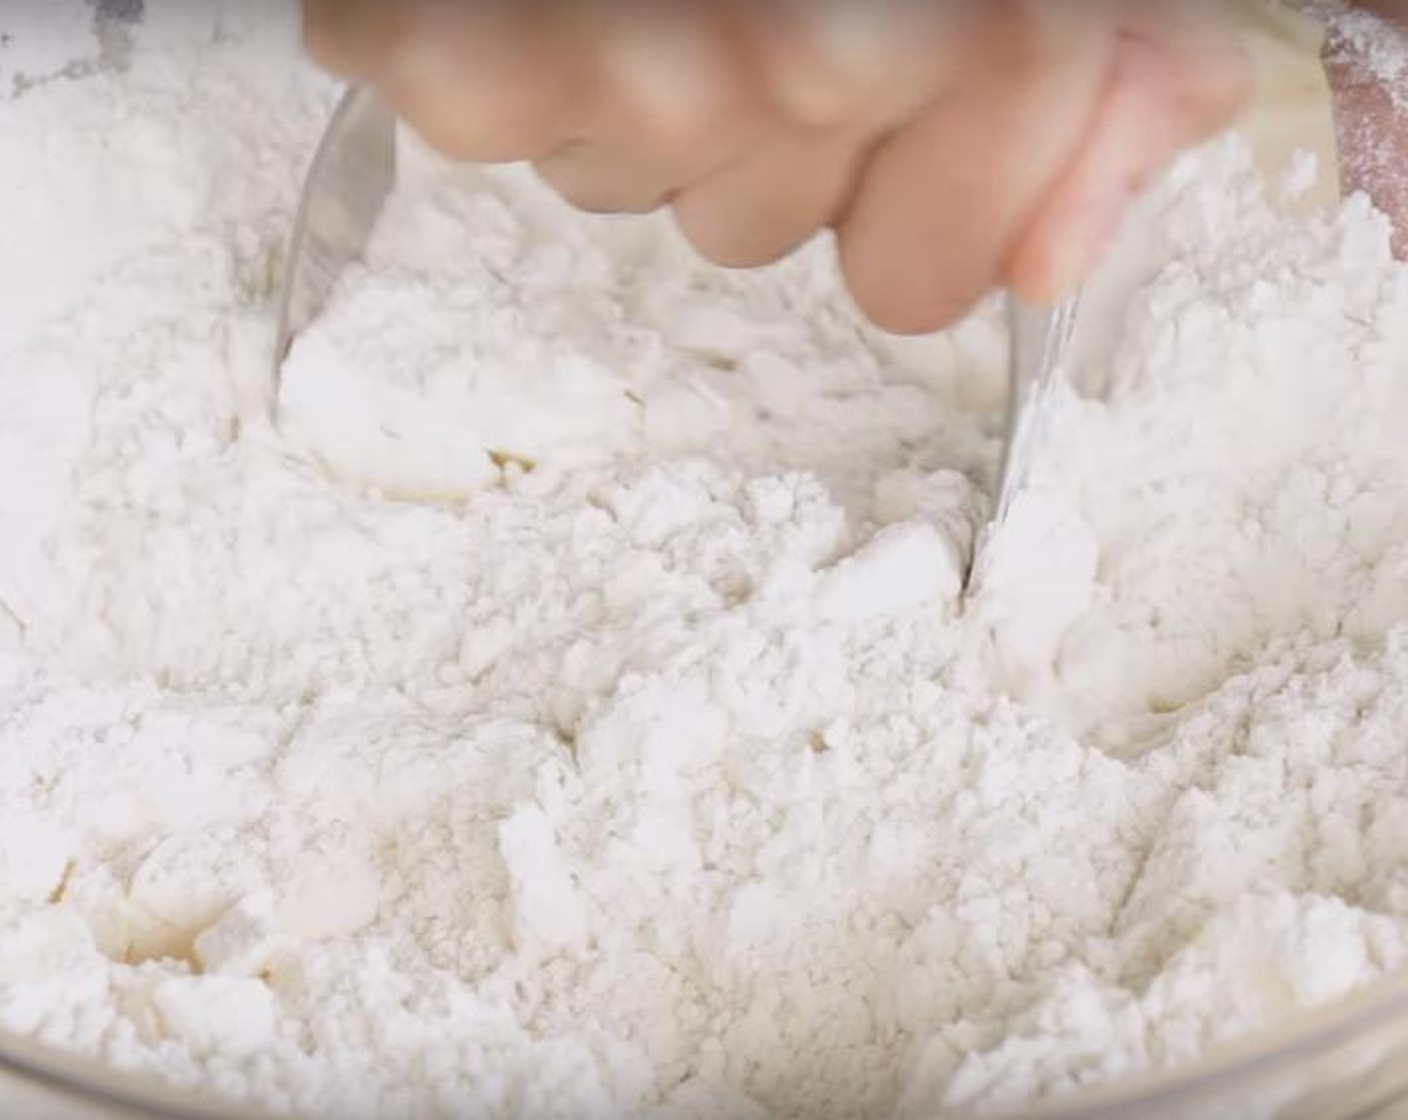 step 1 Sift All-Purpose Flour (2 1/4 cups) into a large bowl, add Salt (1 tsp) and mix together, blend in Butter (1/2 cup) with your fingertips or a pastry blender until mixture resembles coarse meal.